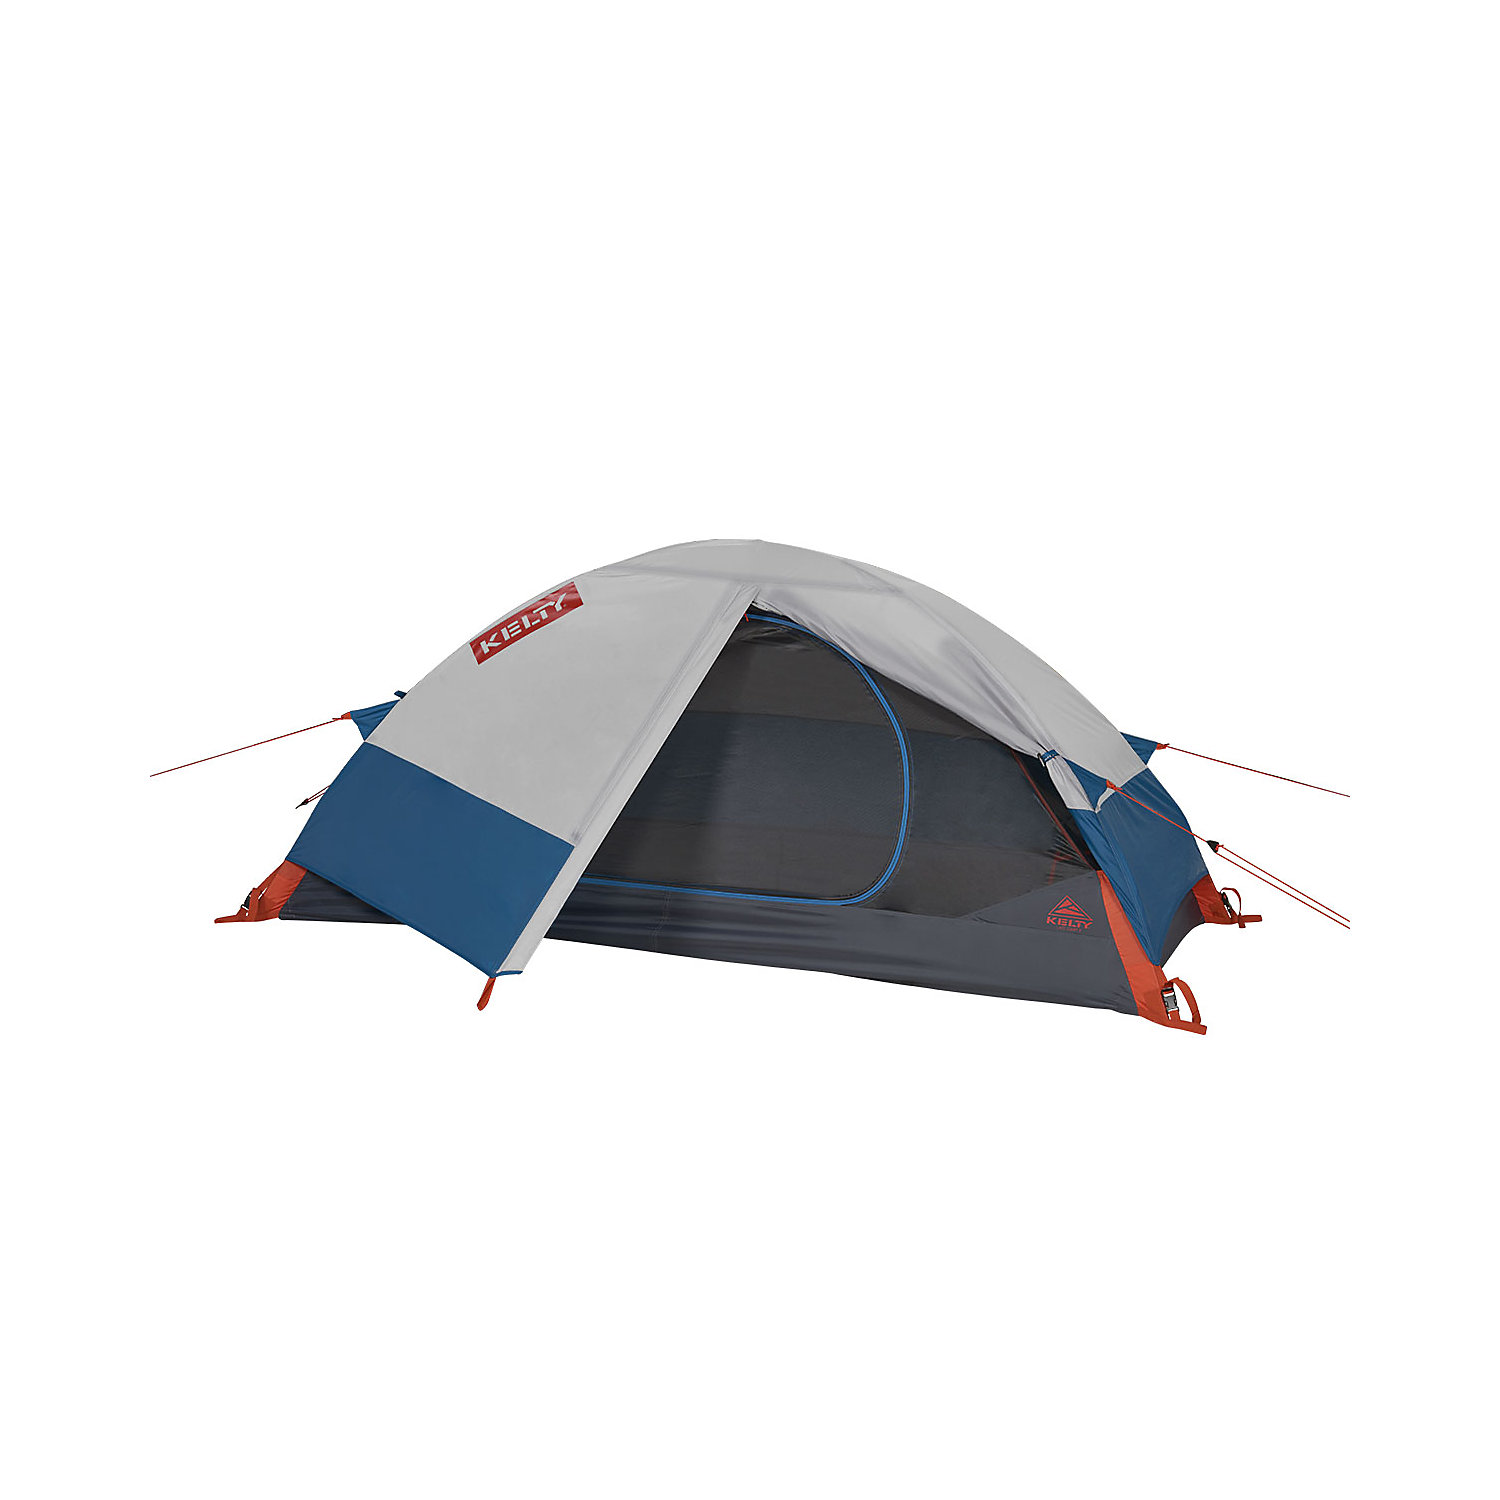 Kelty Late Start 1 Person Tent - 1 Person